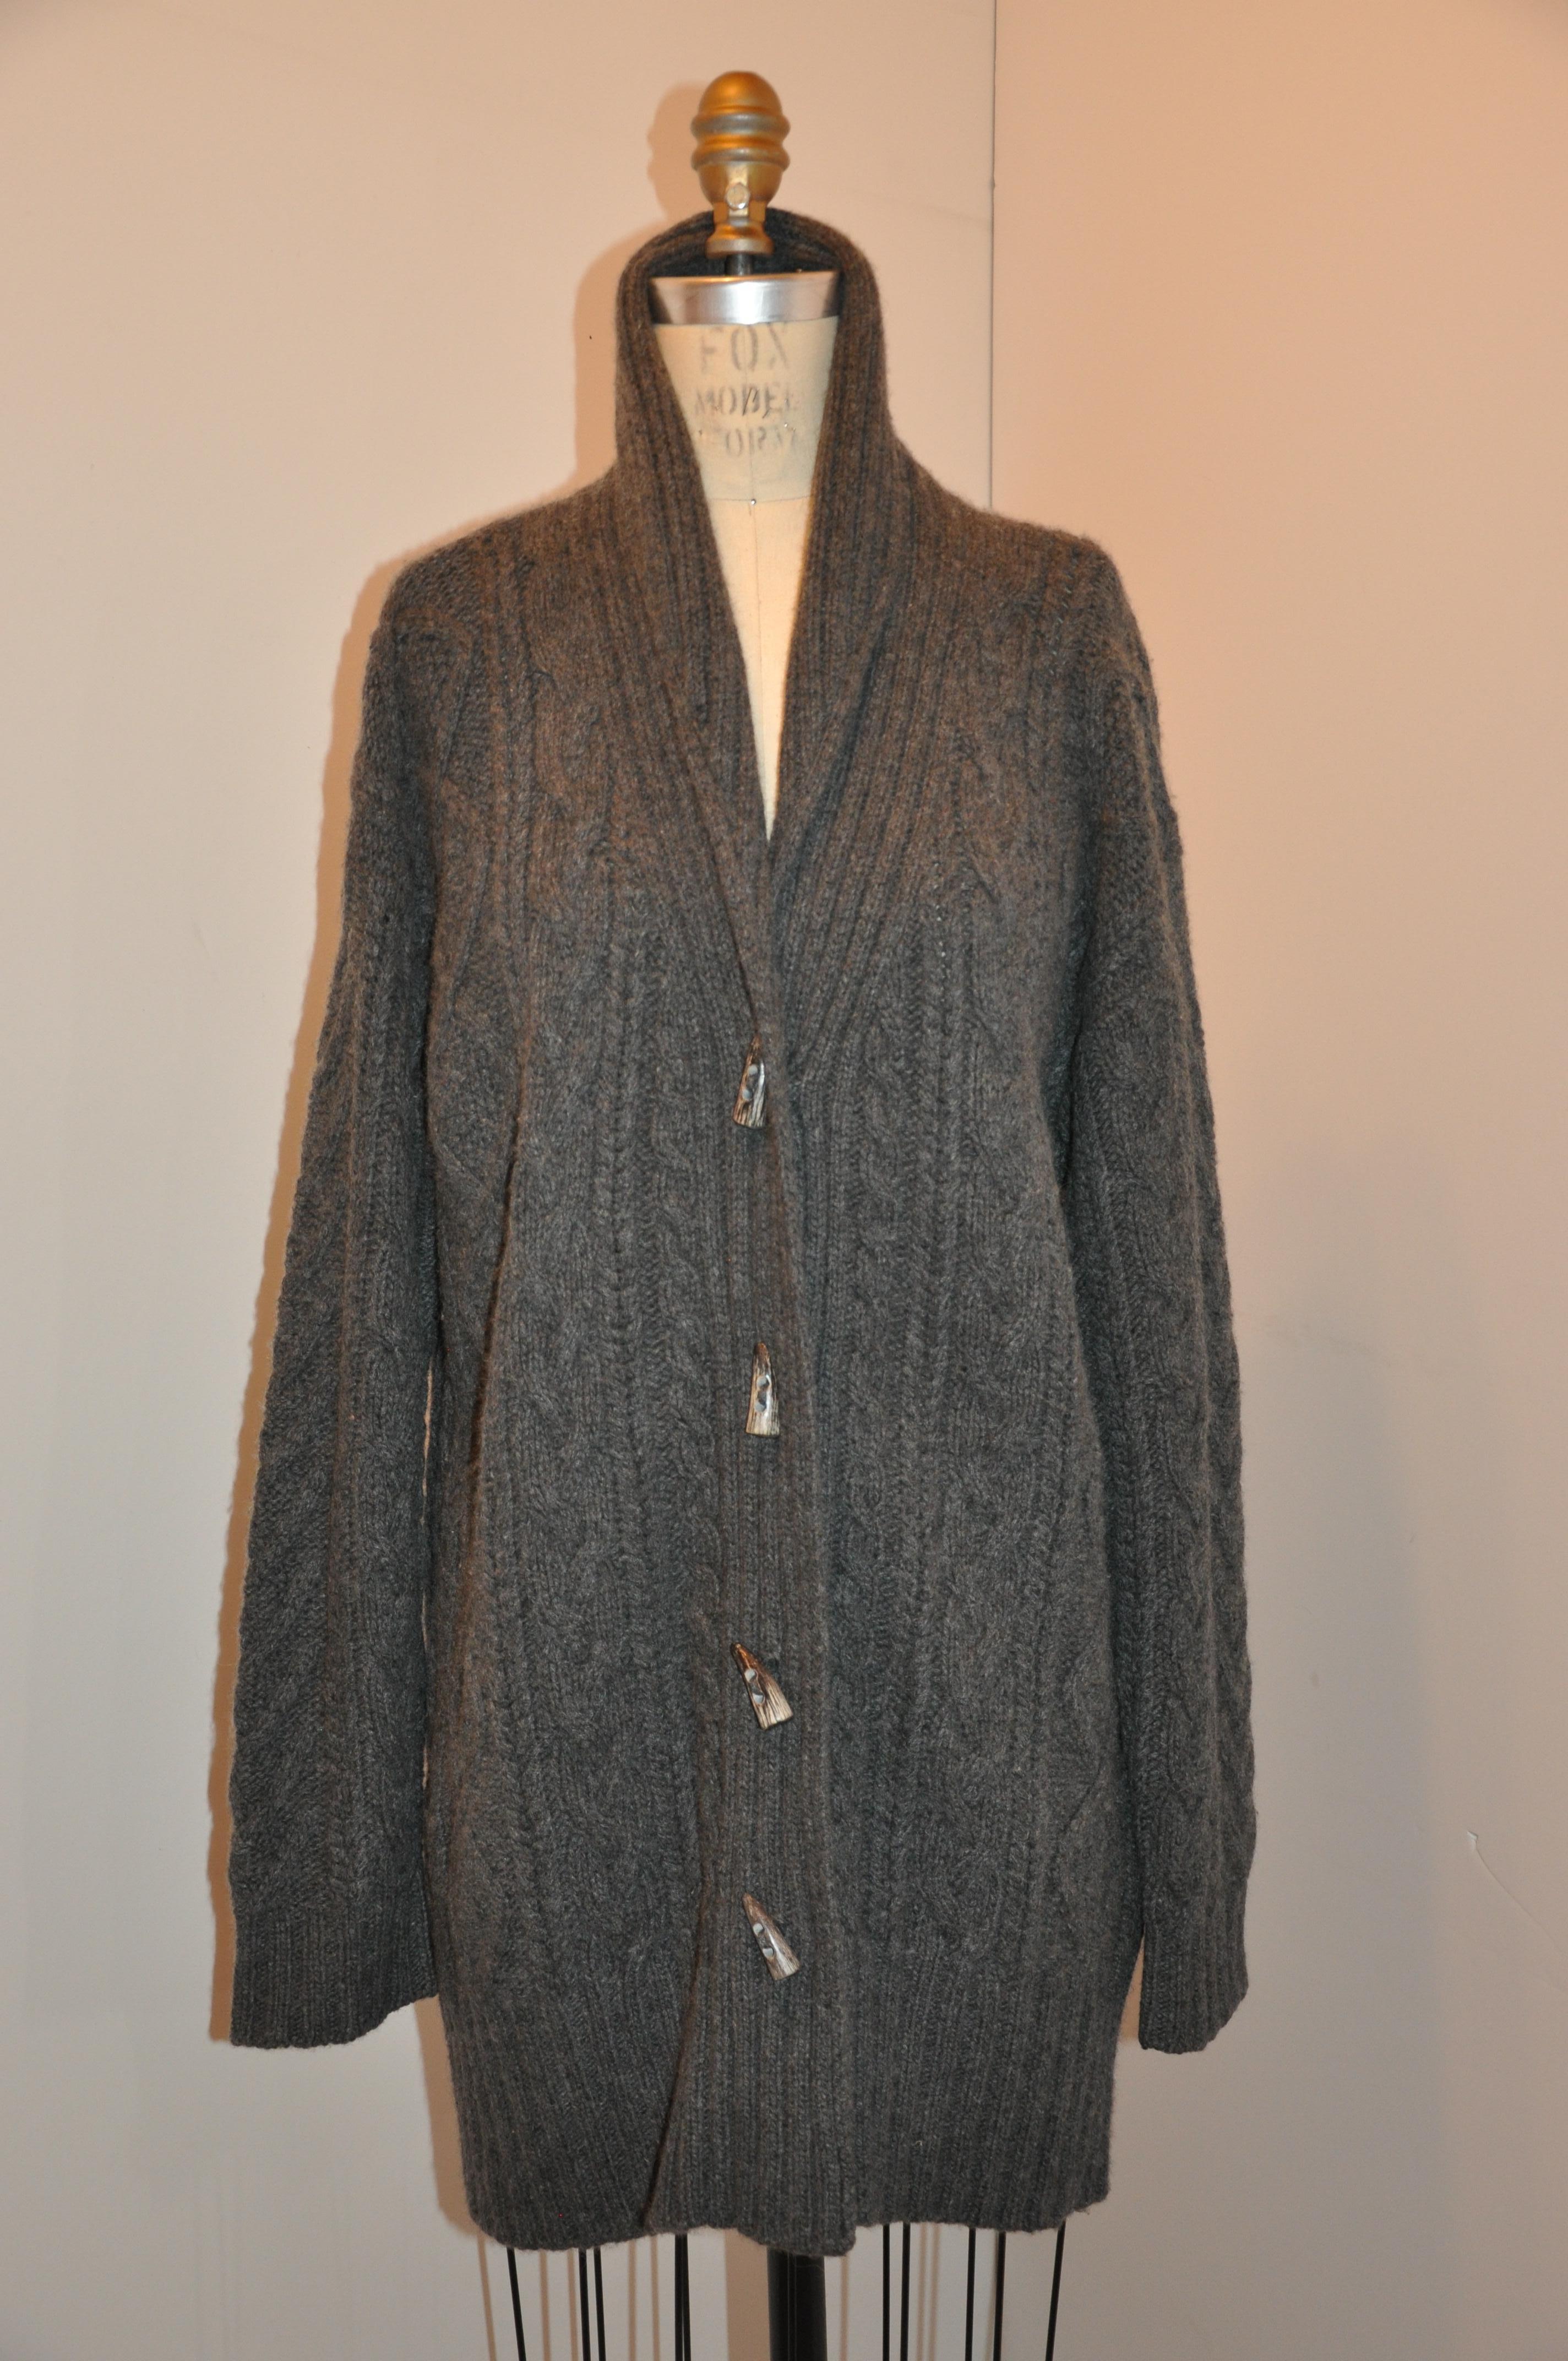 Neiman Marcus warm plush charcoal-gray cashmere button sweater is accented with 4 